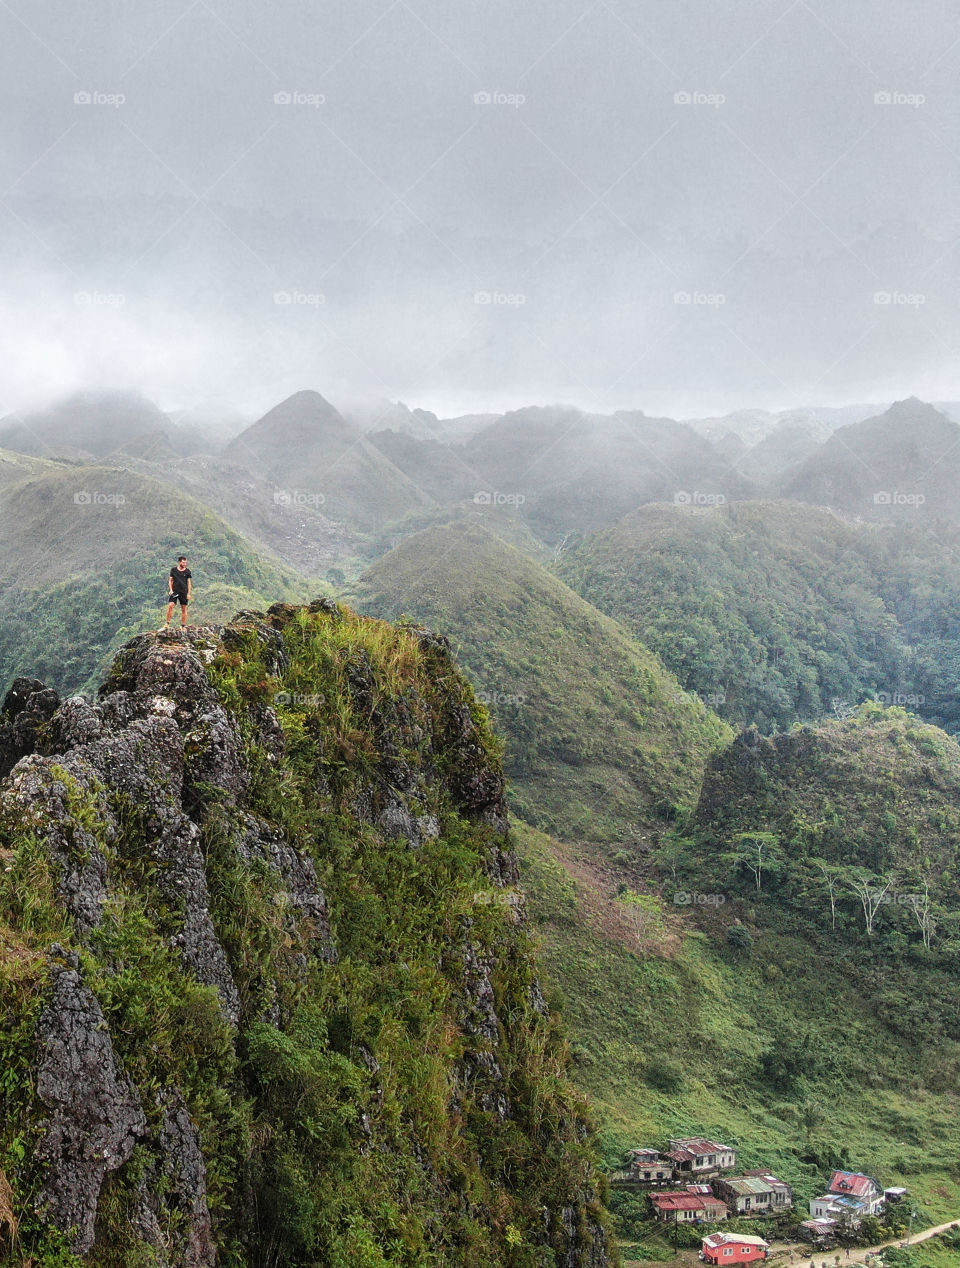 Impressive peak view on Lugsangan Peak or sometimes called Casino Peak at a cloudy, rainy and foggy day in Southern Cebu (Philippines)